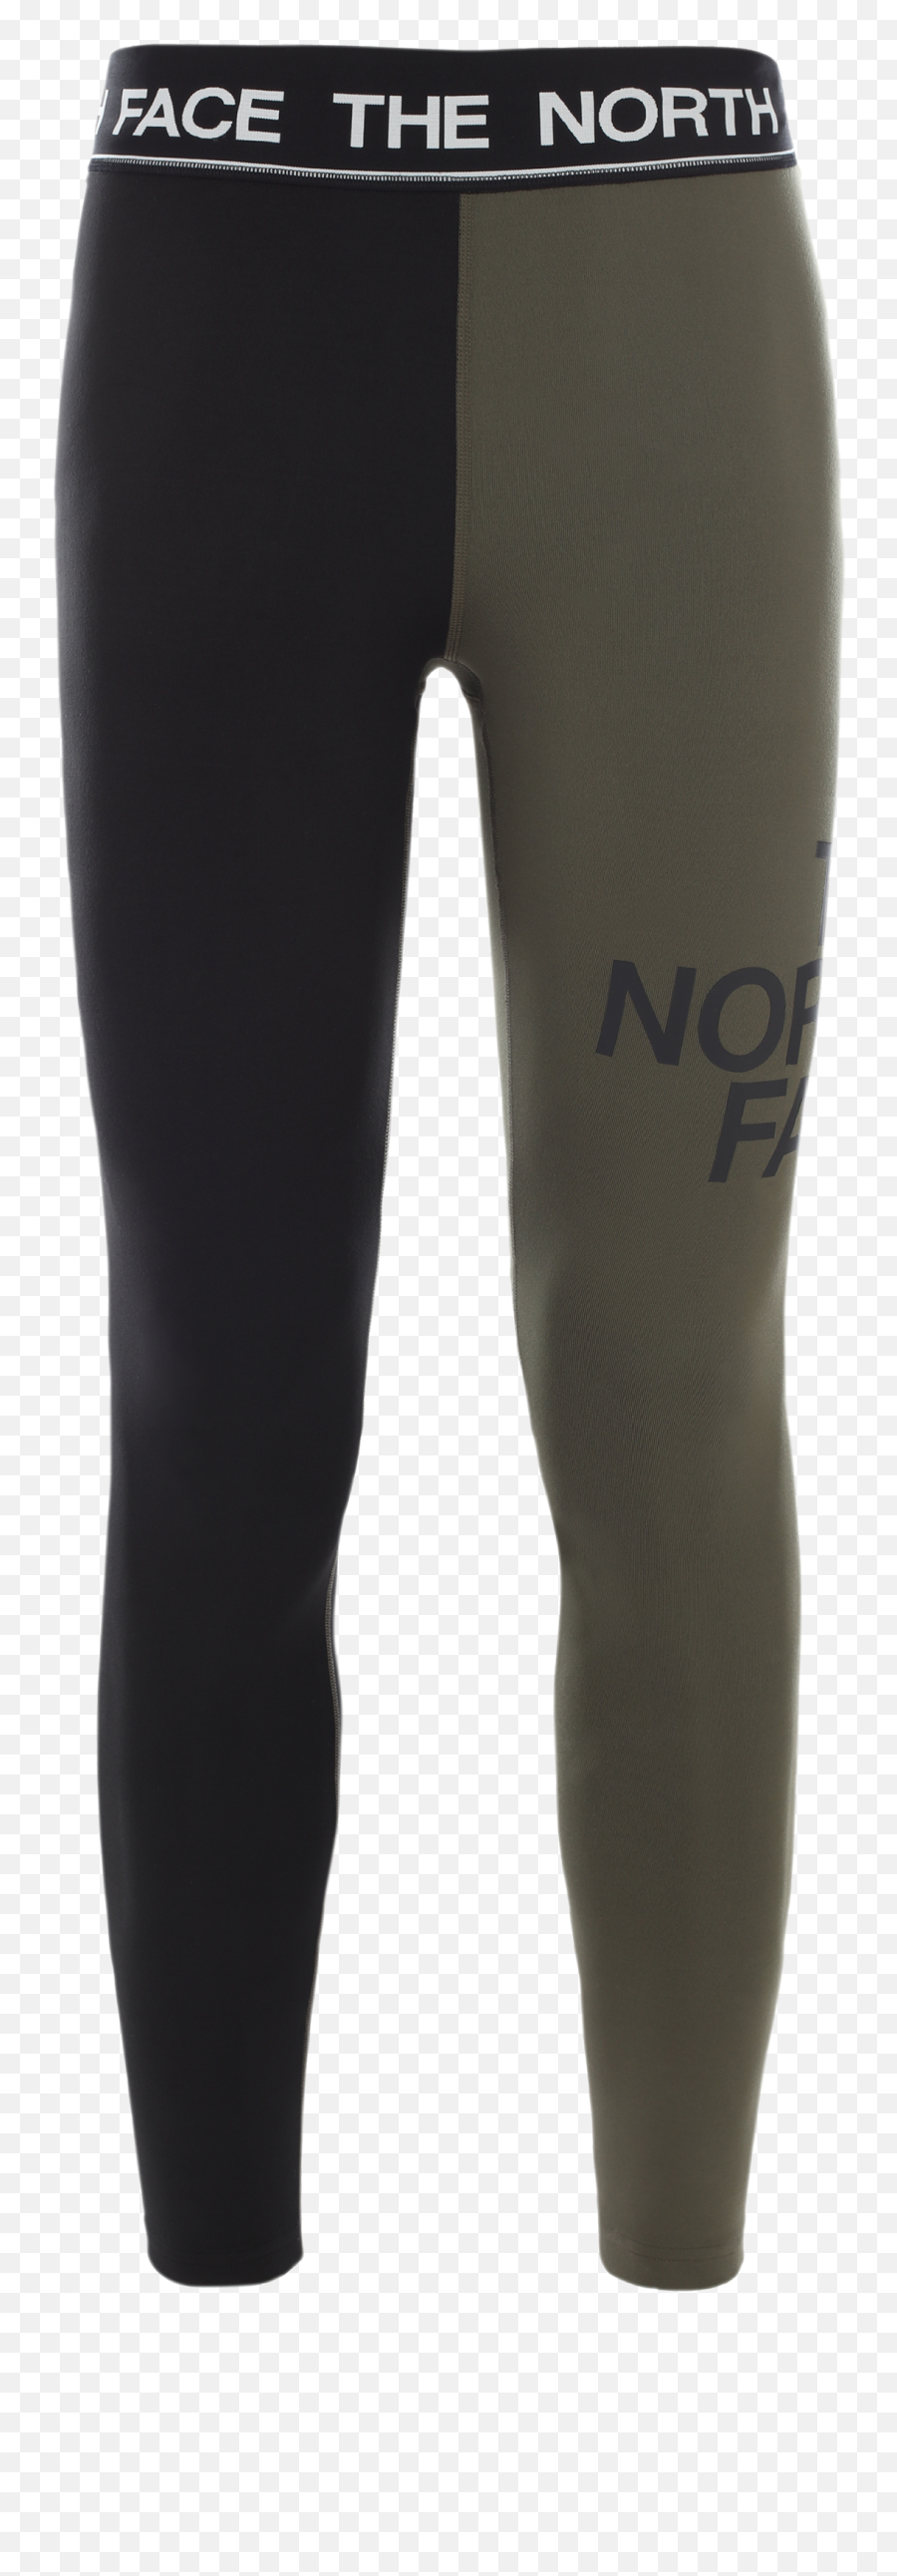 Training Outfits From The North Face - Yoga Pants Emoji,Calvin Klein Logo Legging